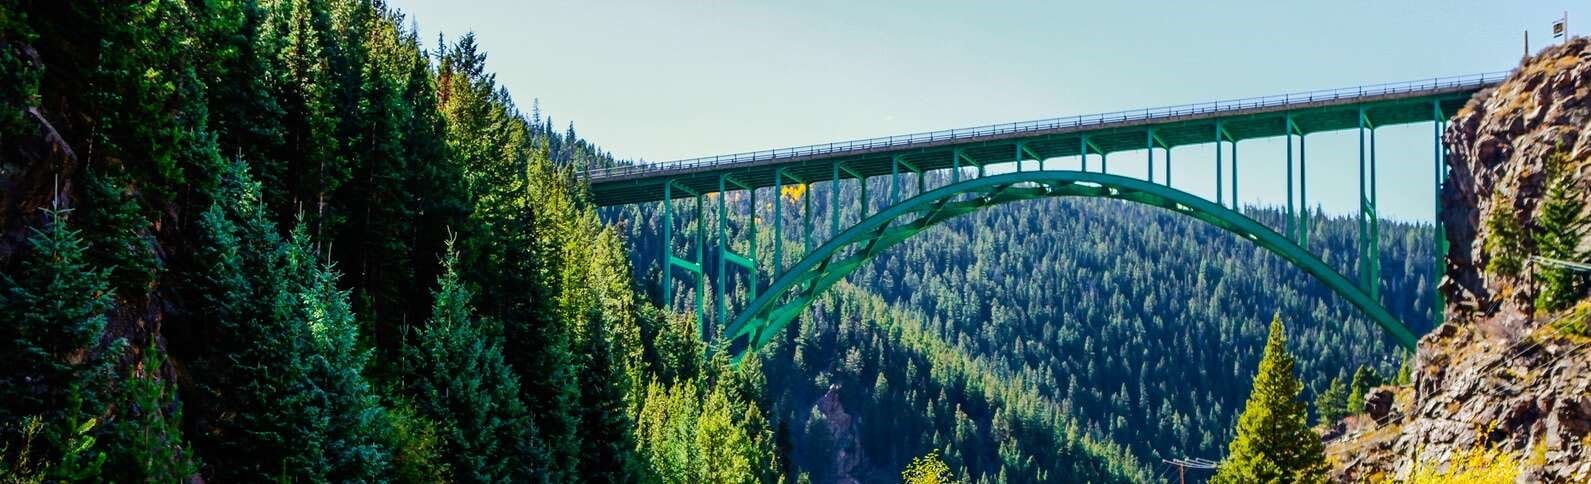 The iconic Red Cliff Bridge stretches between rocky outcroppings near Vail, CO.